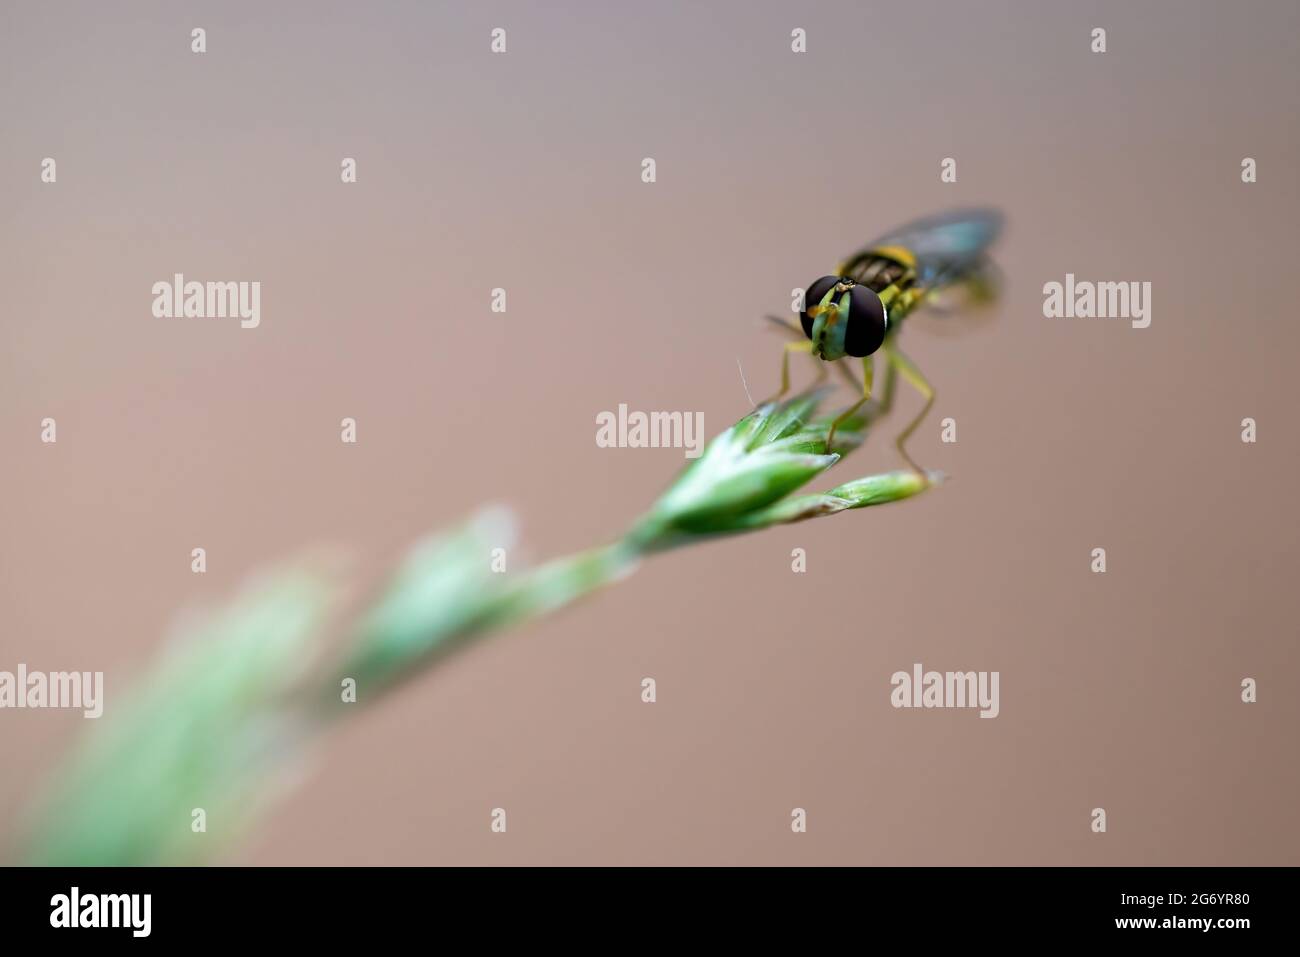 Macro shot of Hoverfly, also known as flower fly or syrphid fly (Syrphidae family) perched on strand of green grass. Isolated on beige background. Stock Photo